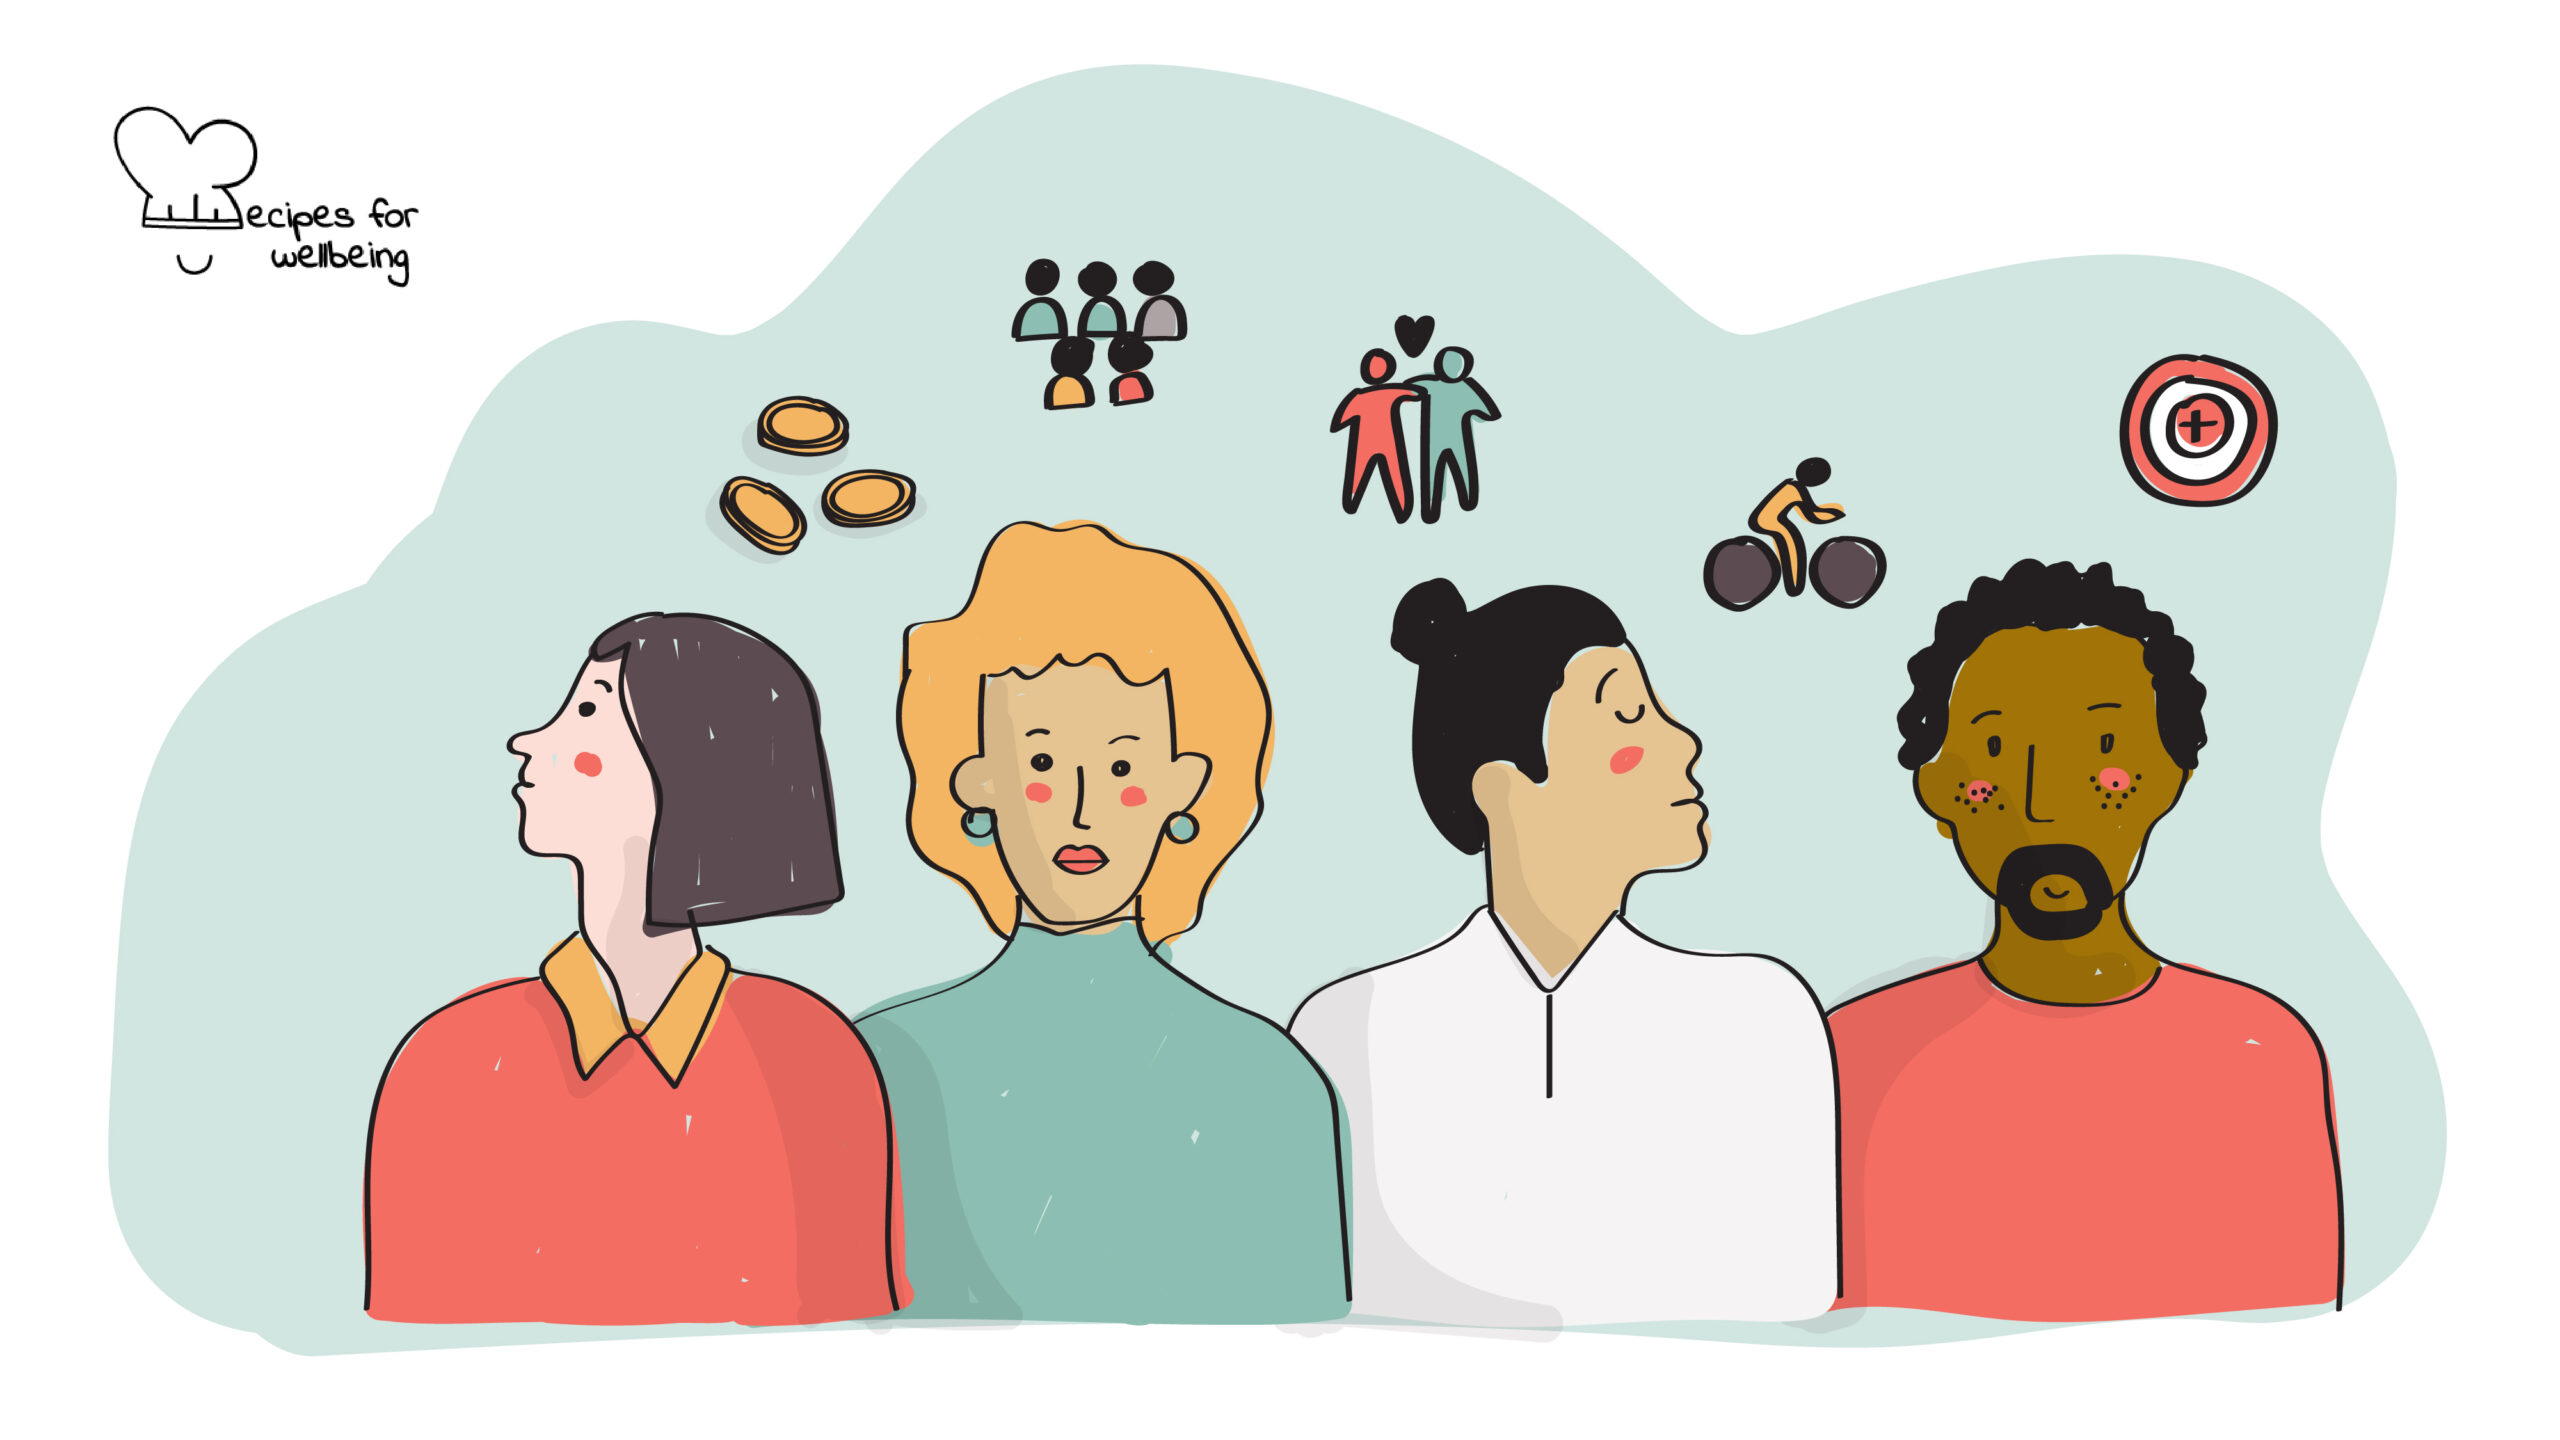 Illustration of four people surrounded by icons such as 3 coins, a target, two people hugging, a person riding a bike, and a group of people. © Recipes for Wellbeing